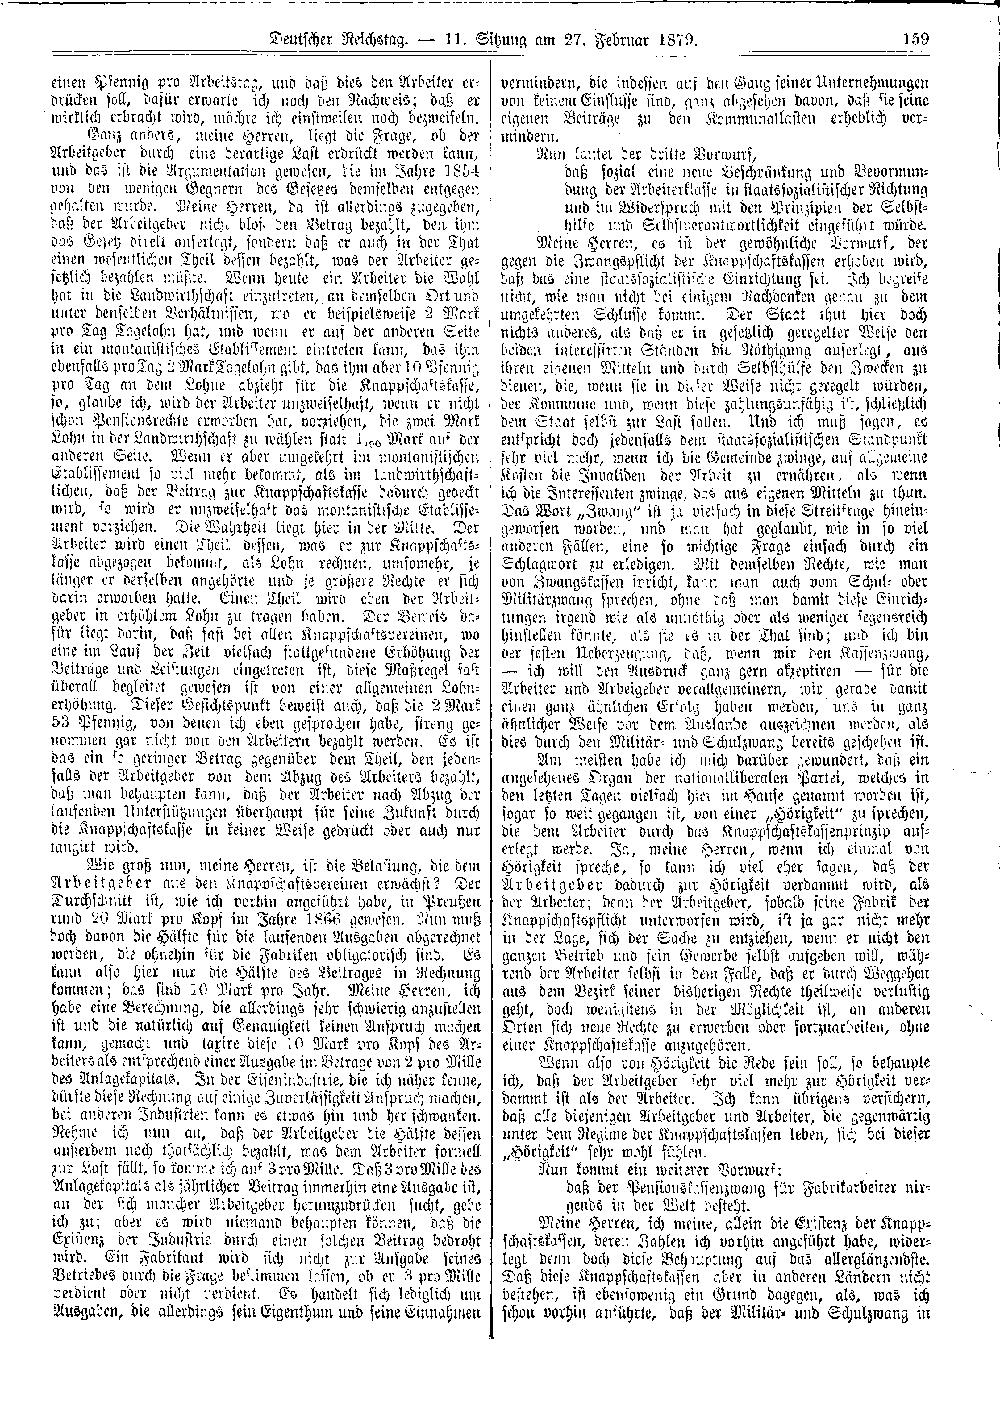 Scan of page 159